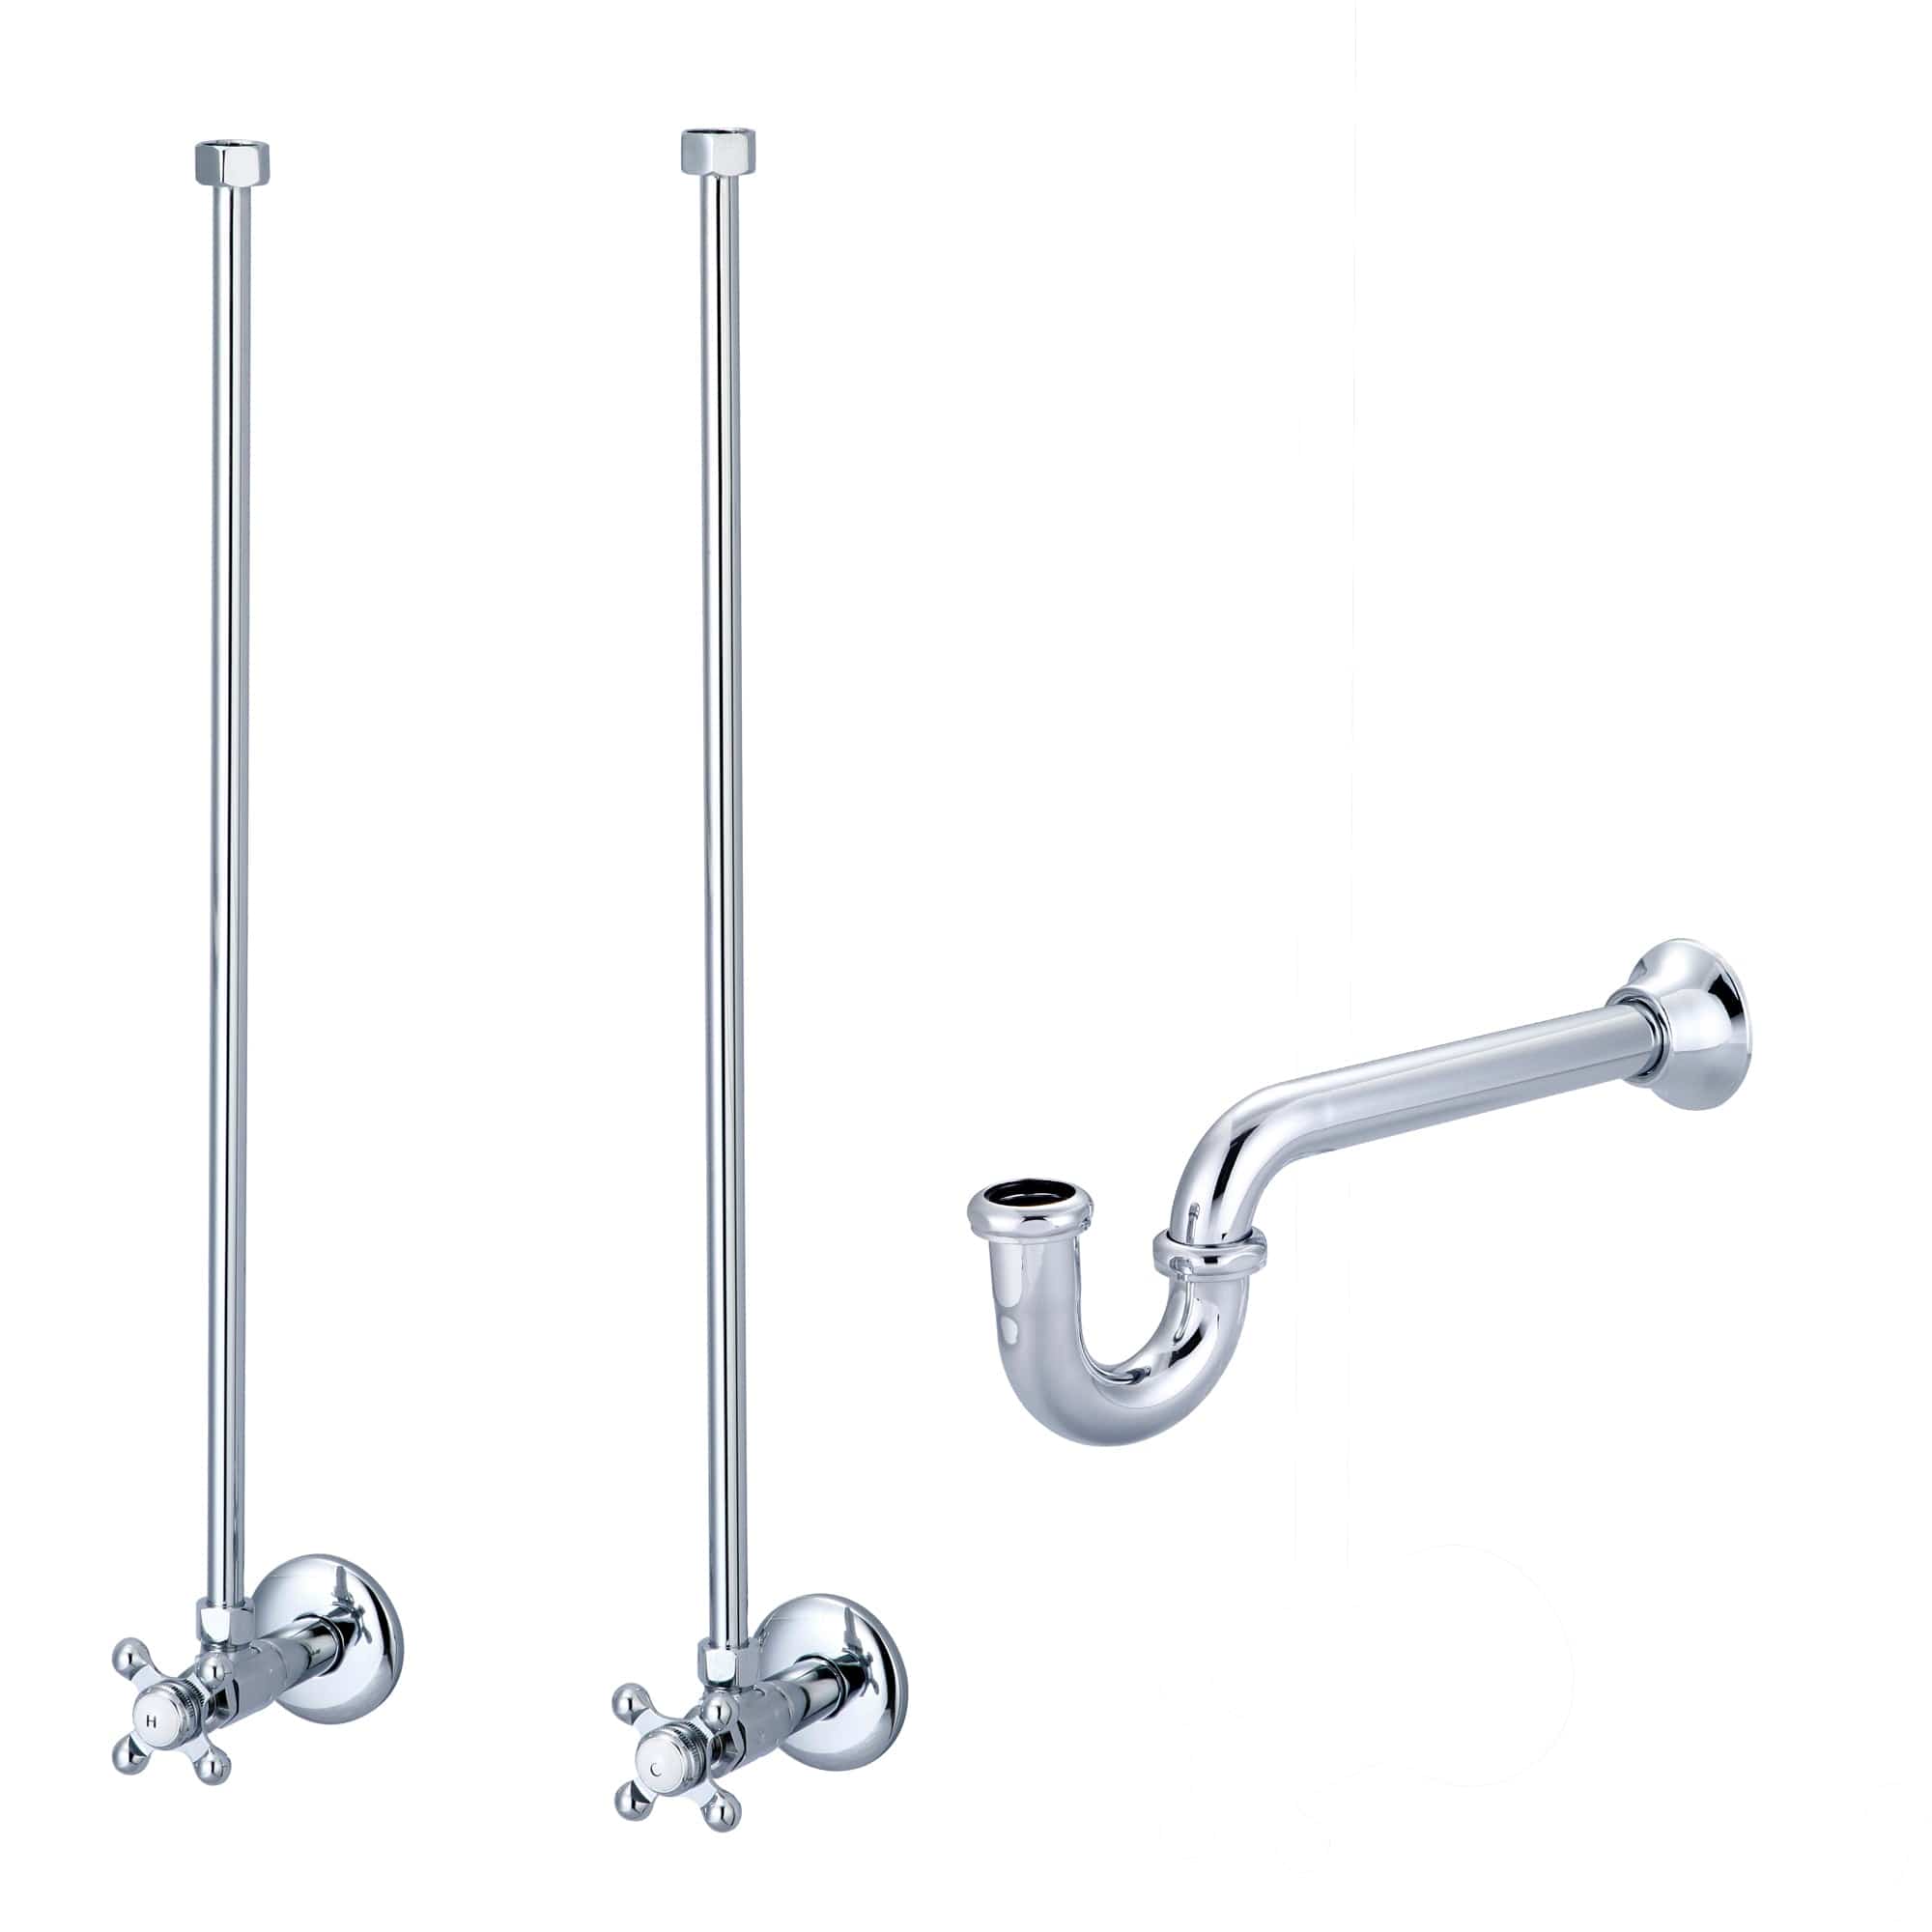 Empire 30 Inch Wide Single Wash Stand and P-Trap included in Chrome Finish - Molaix732030762527EP30B-0100